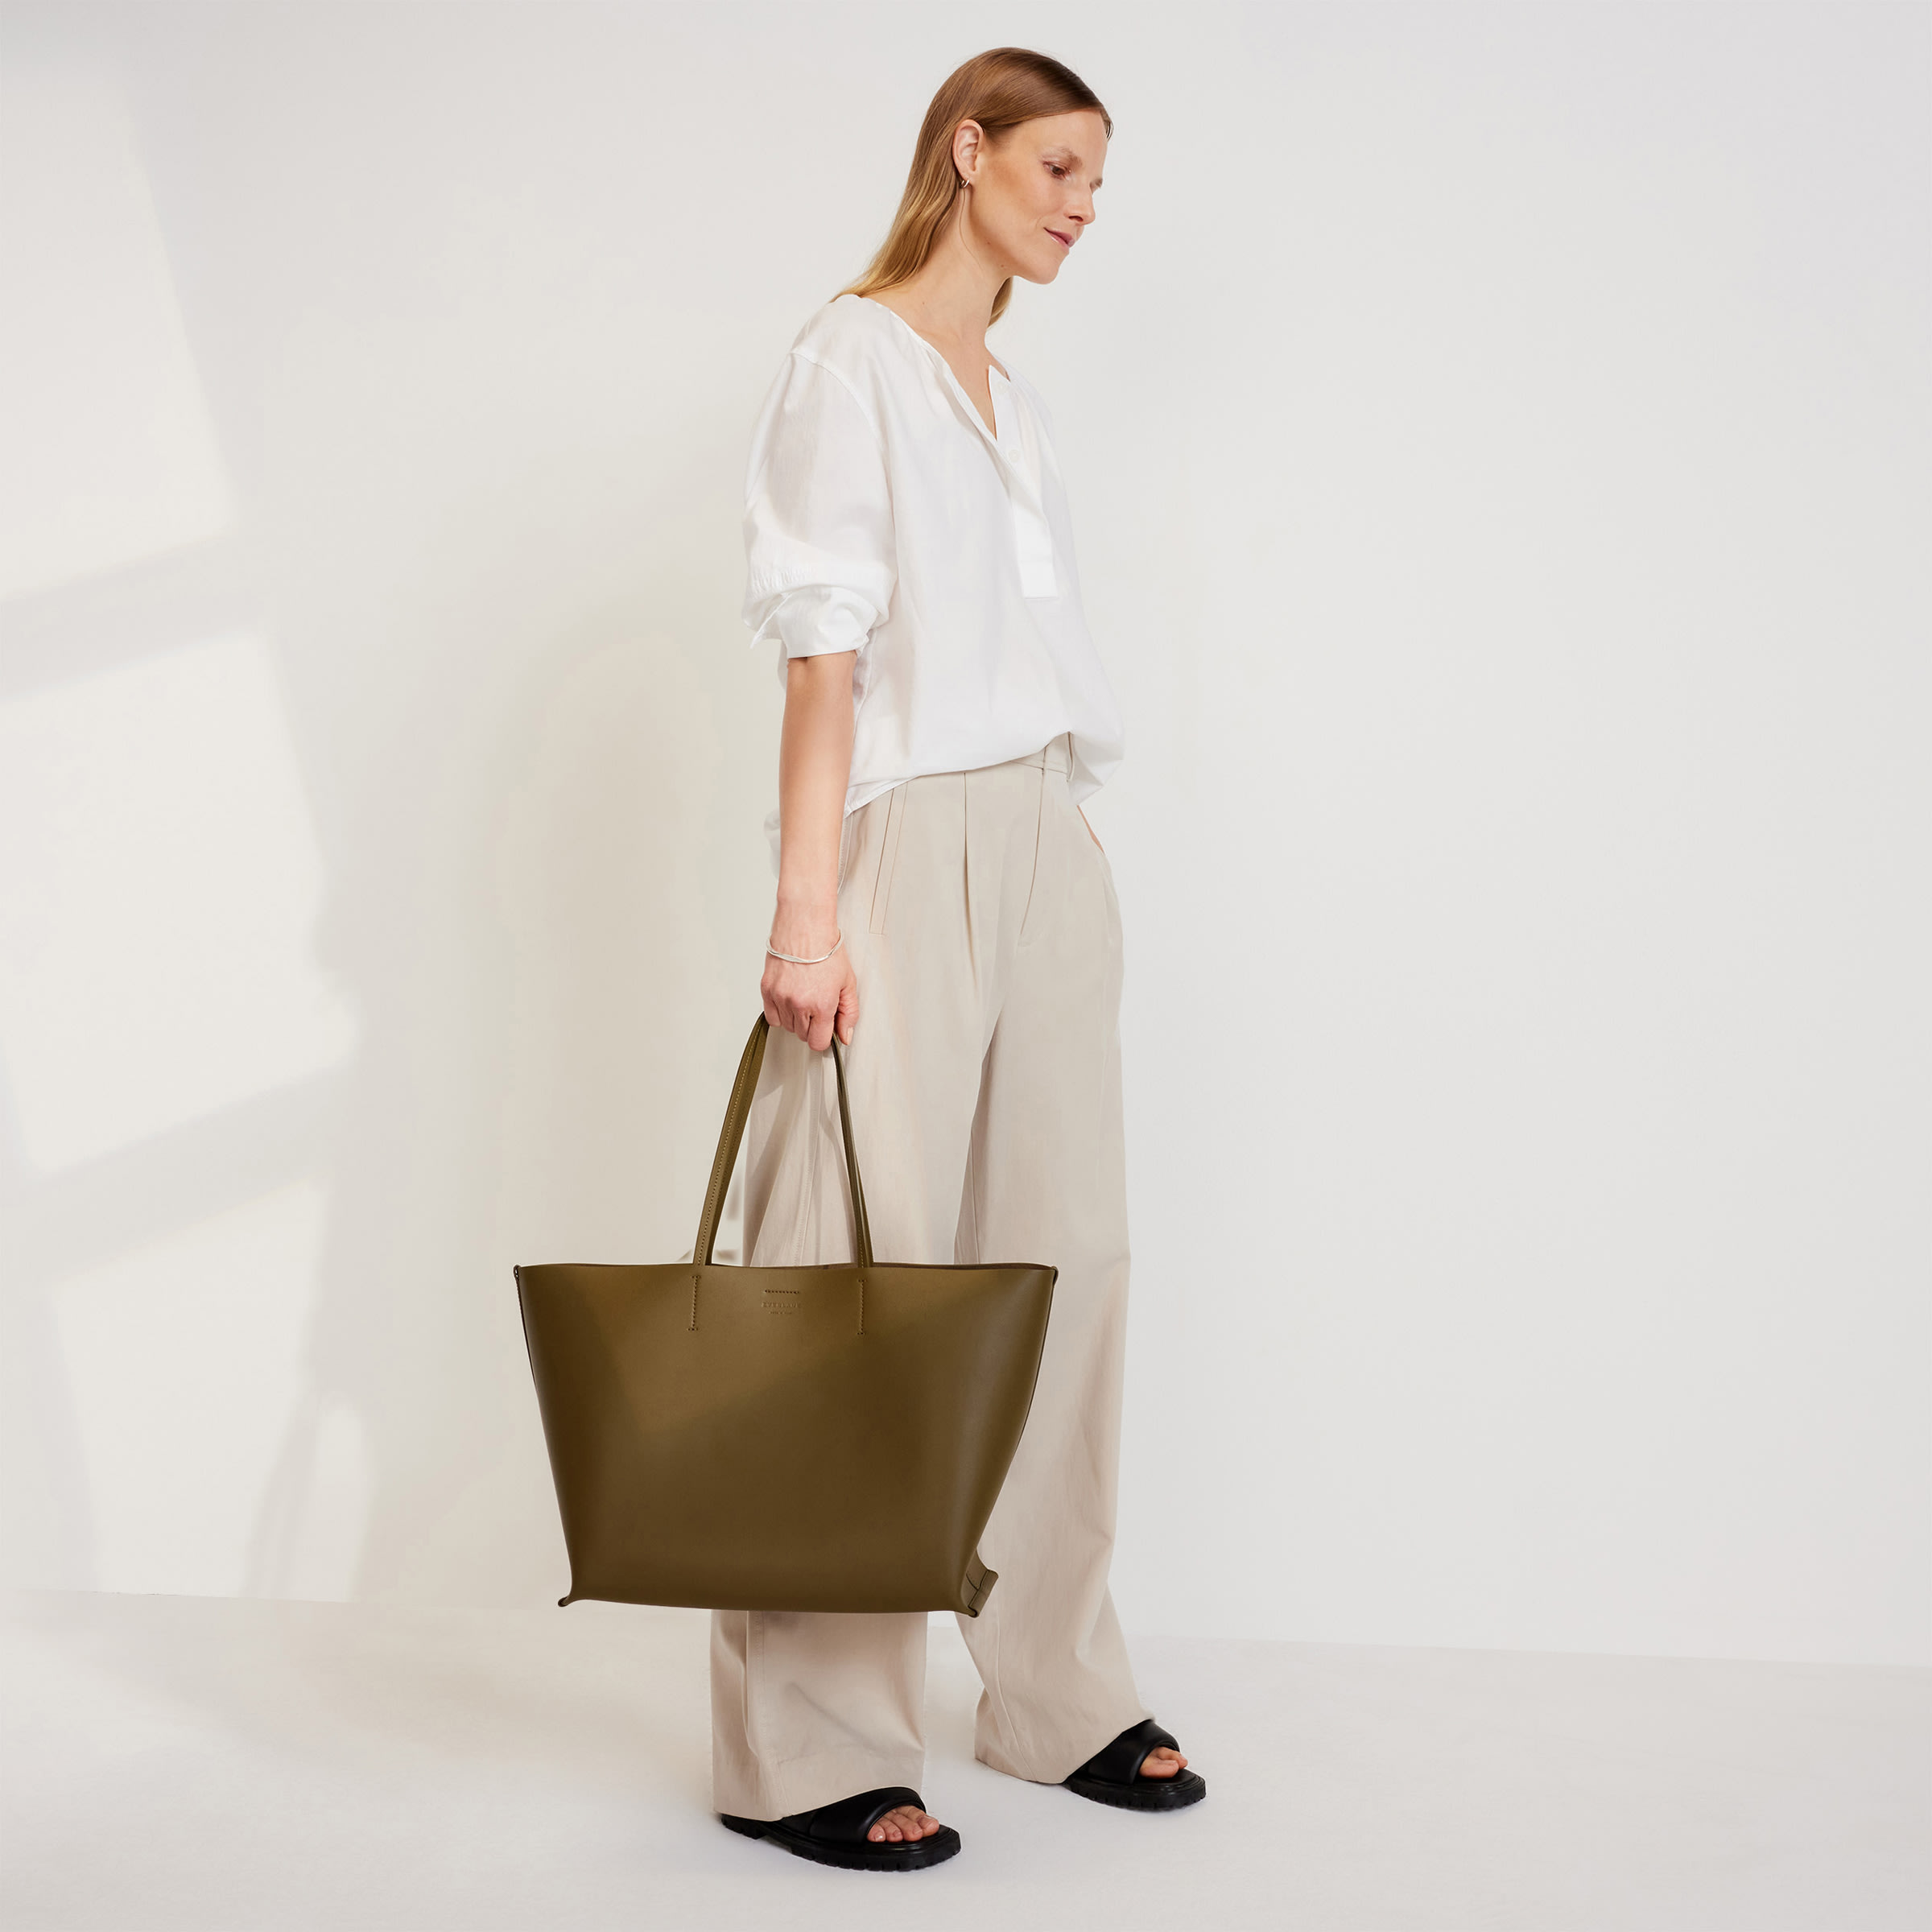 The Luxe Italian Leather Tote Black – Everlane